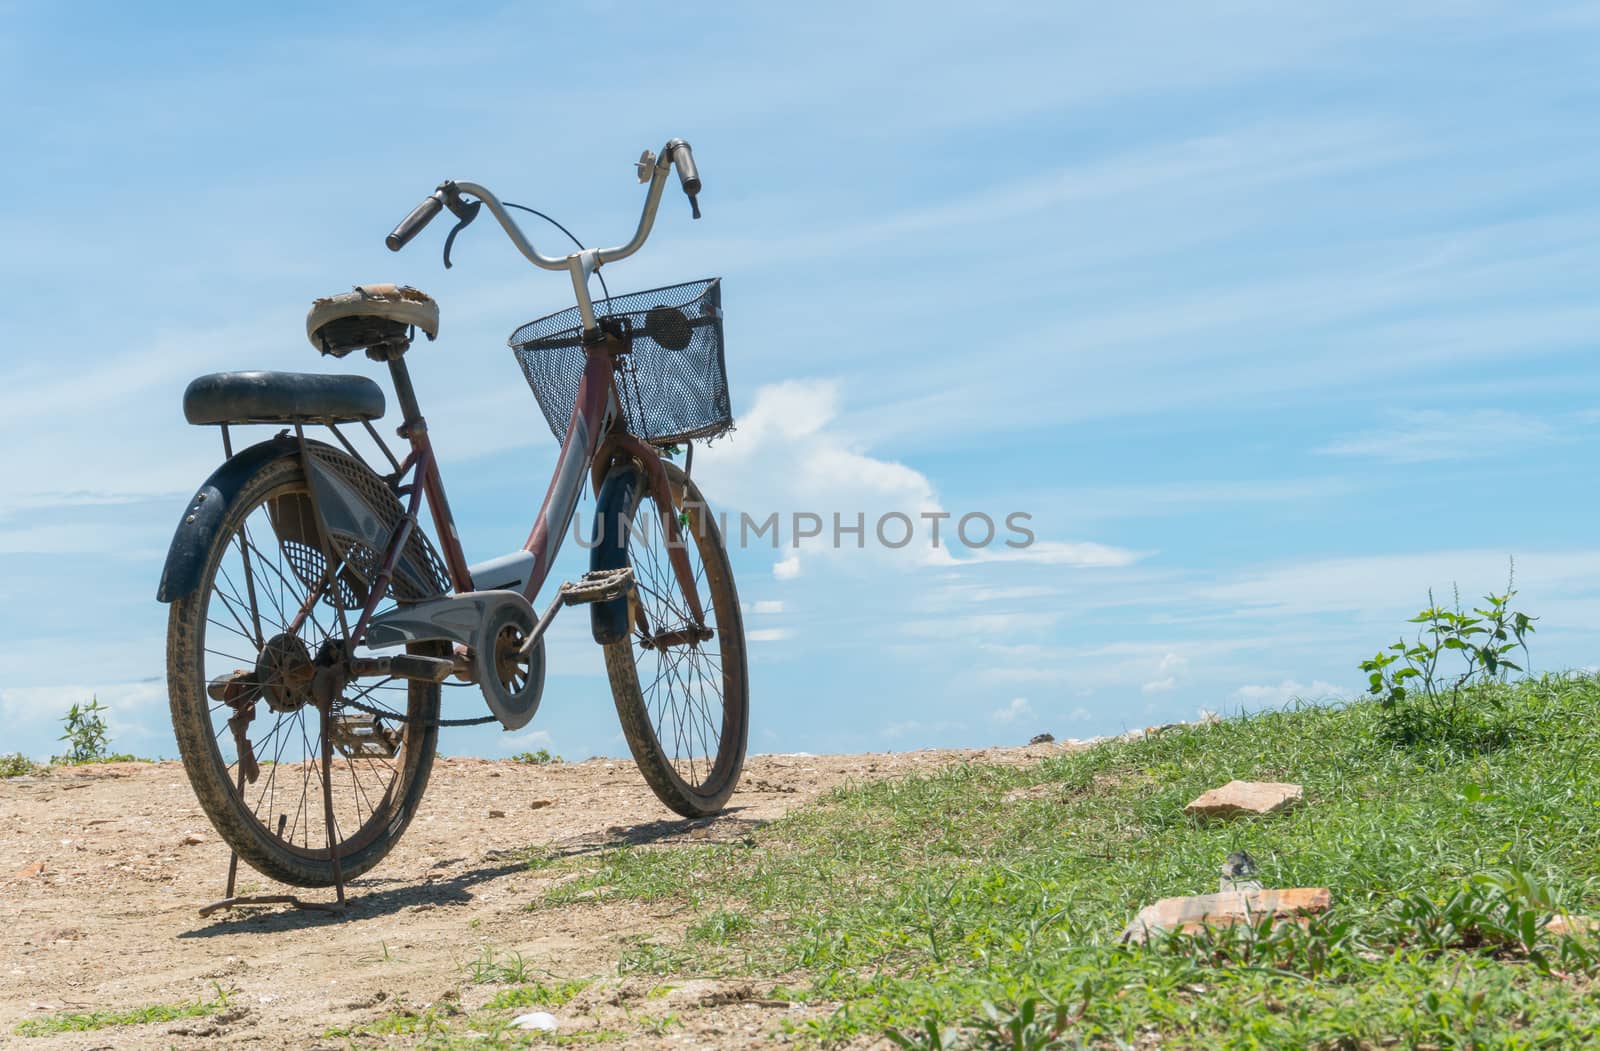 Red bicycle on beach and blue sky and sea or brine. Bicycle on rock or stone mound or pile. Landscape summer concept in relaxation mood for 
design